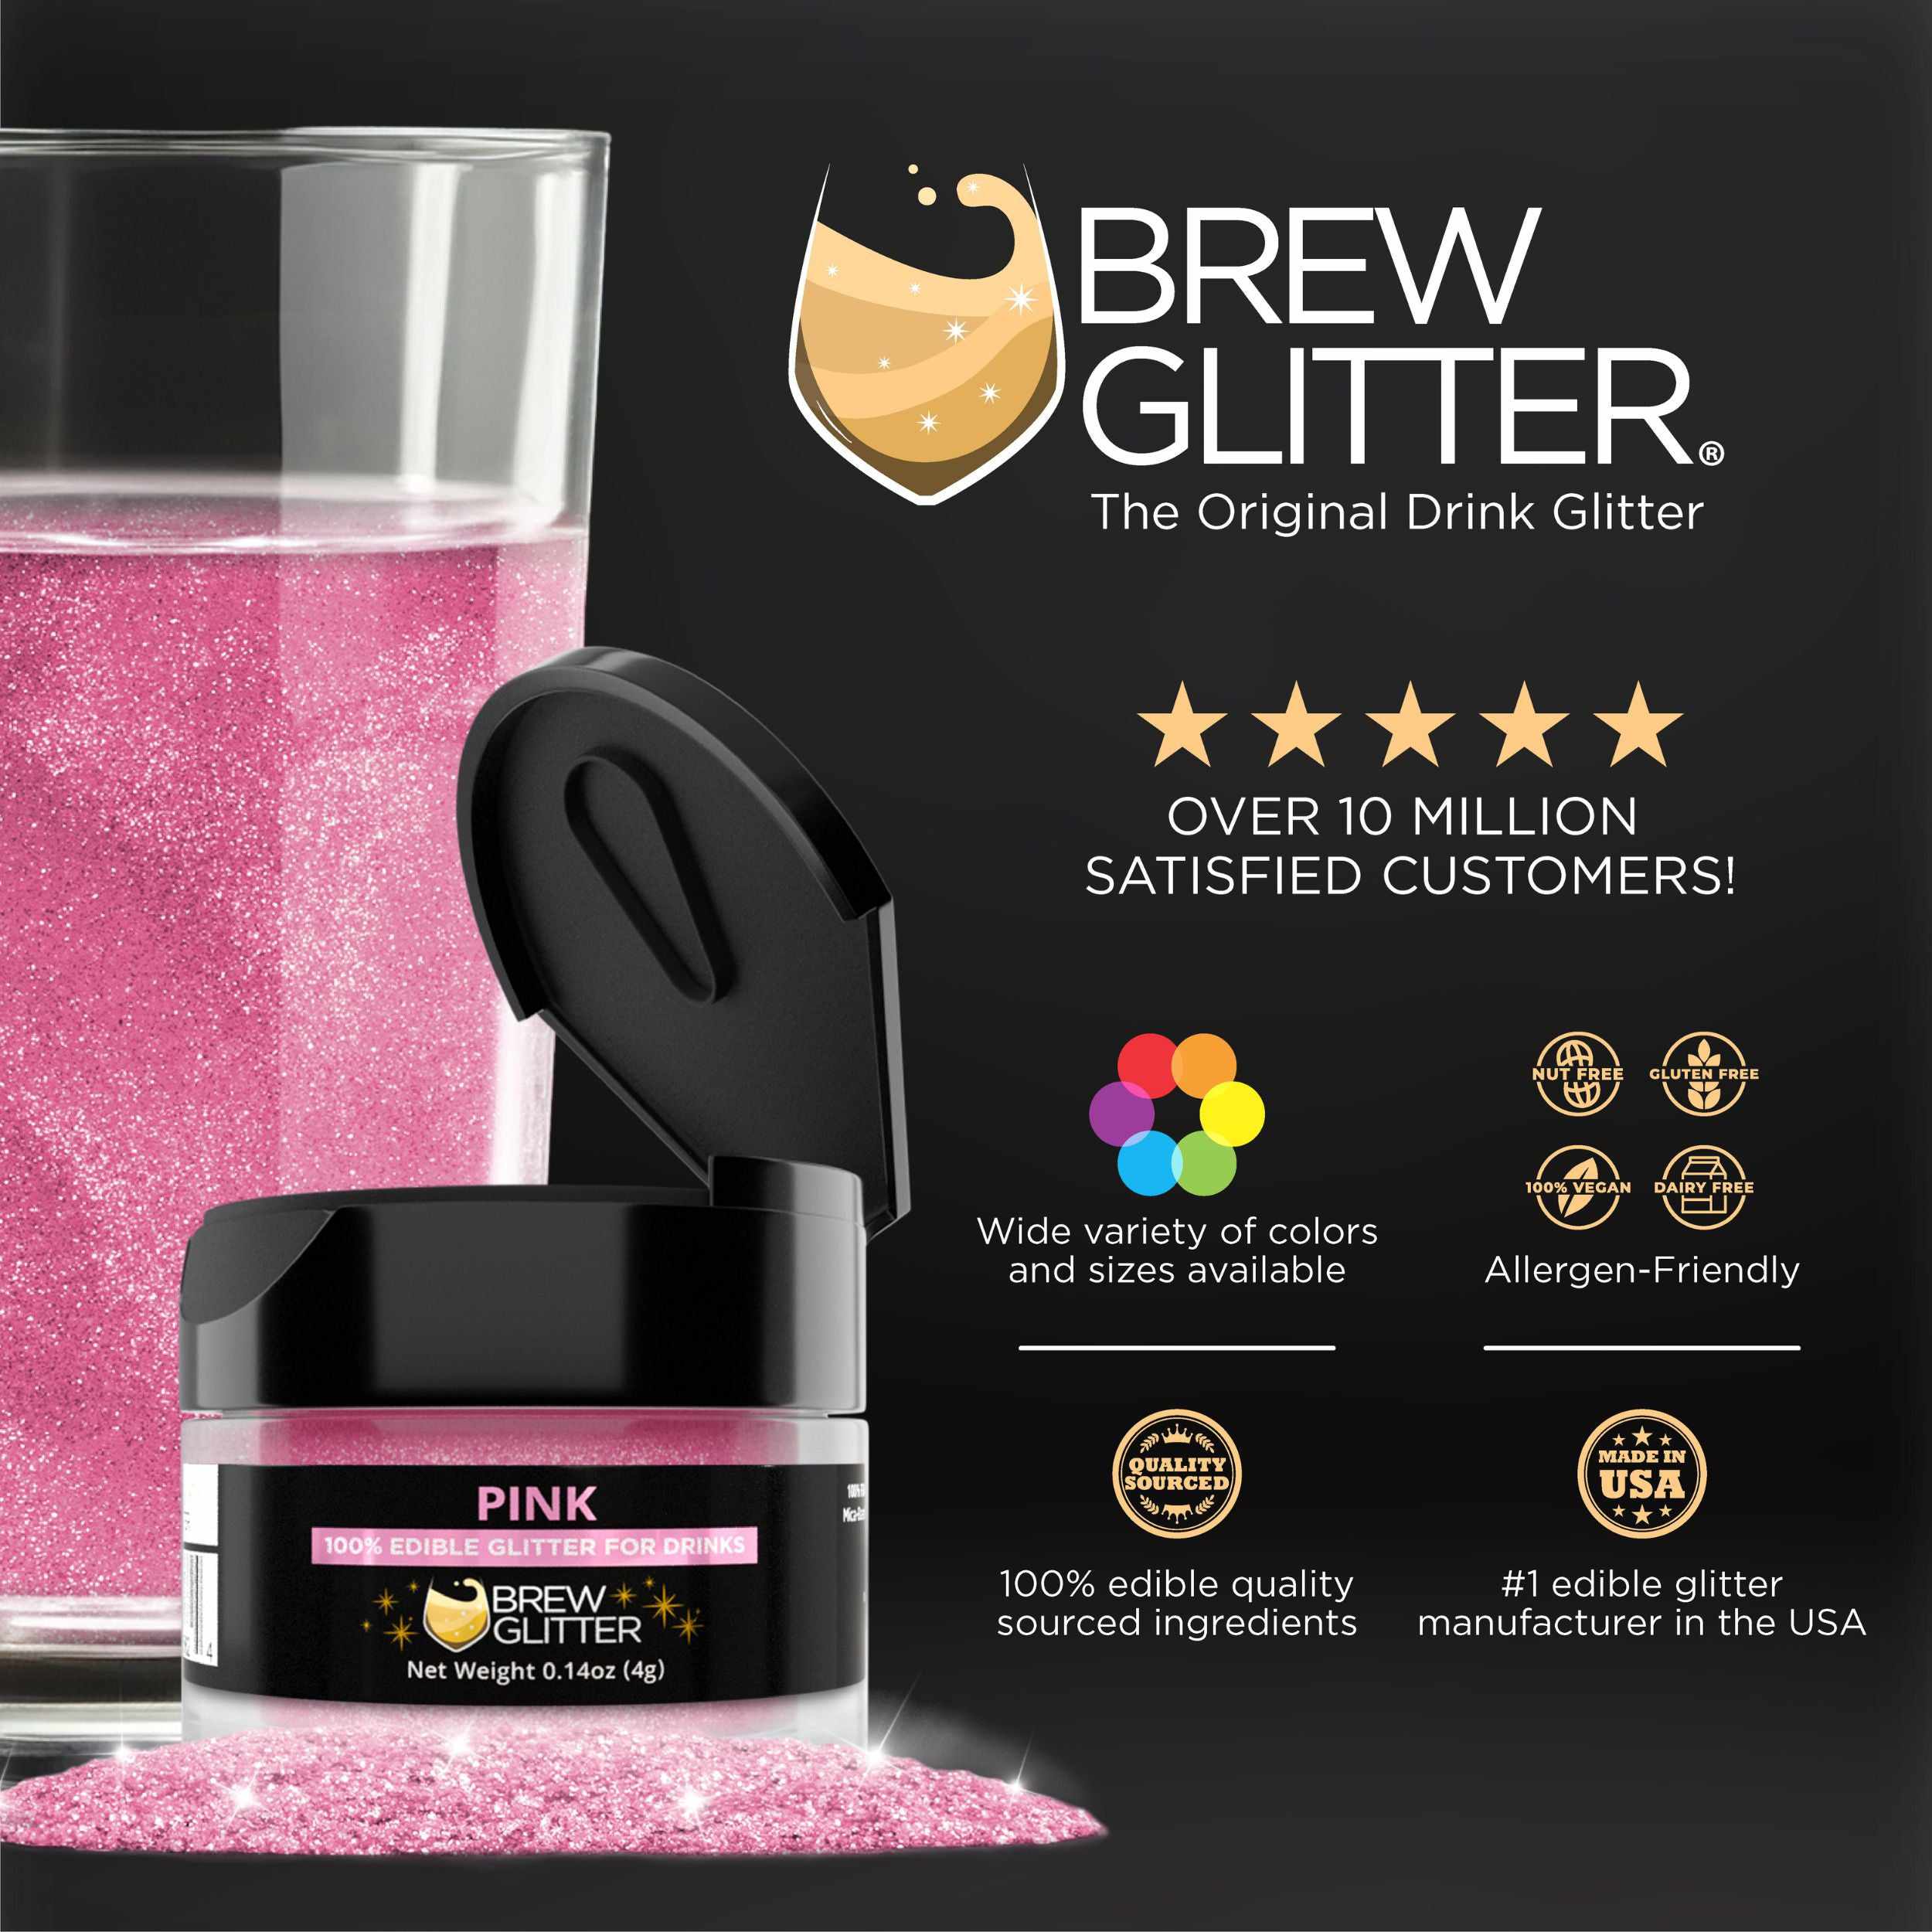 Pink Cocktail Glitter | Edible Glitter for Cocktails Drinks!